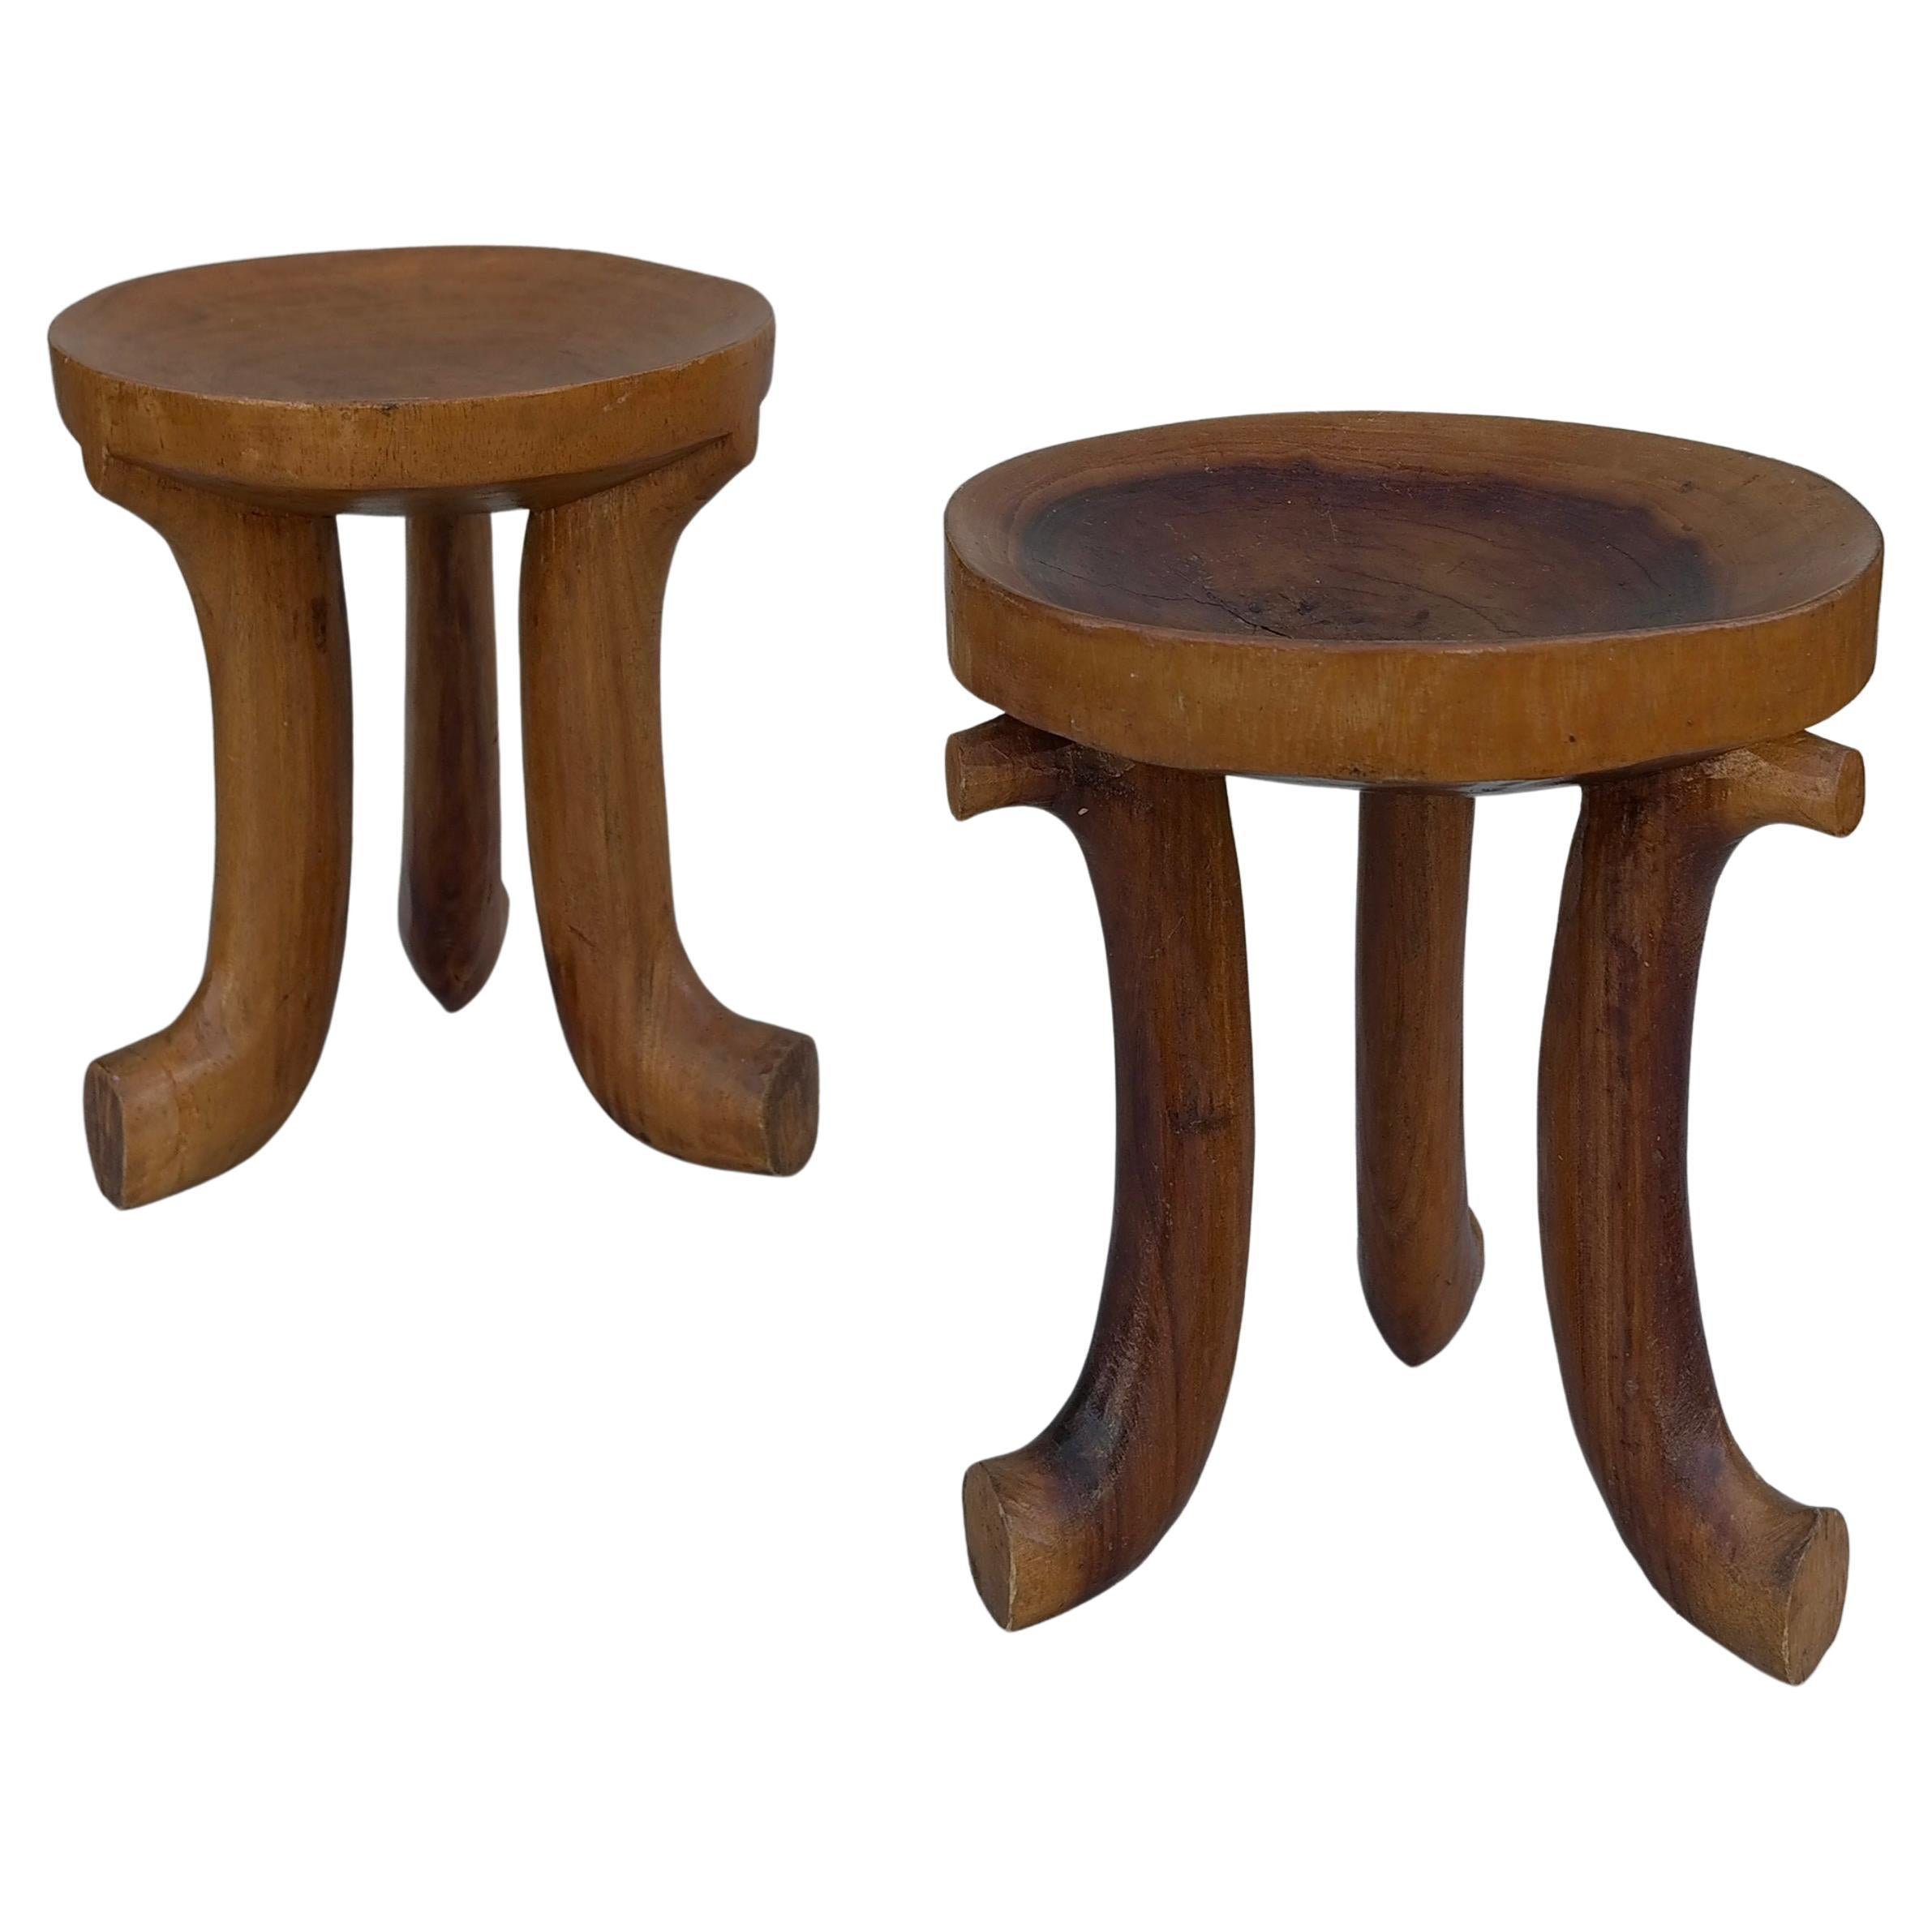 2 African Gurage Three-Legged carved solid wooden Stools, Ethiopia